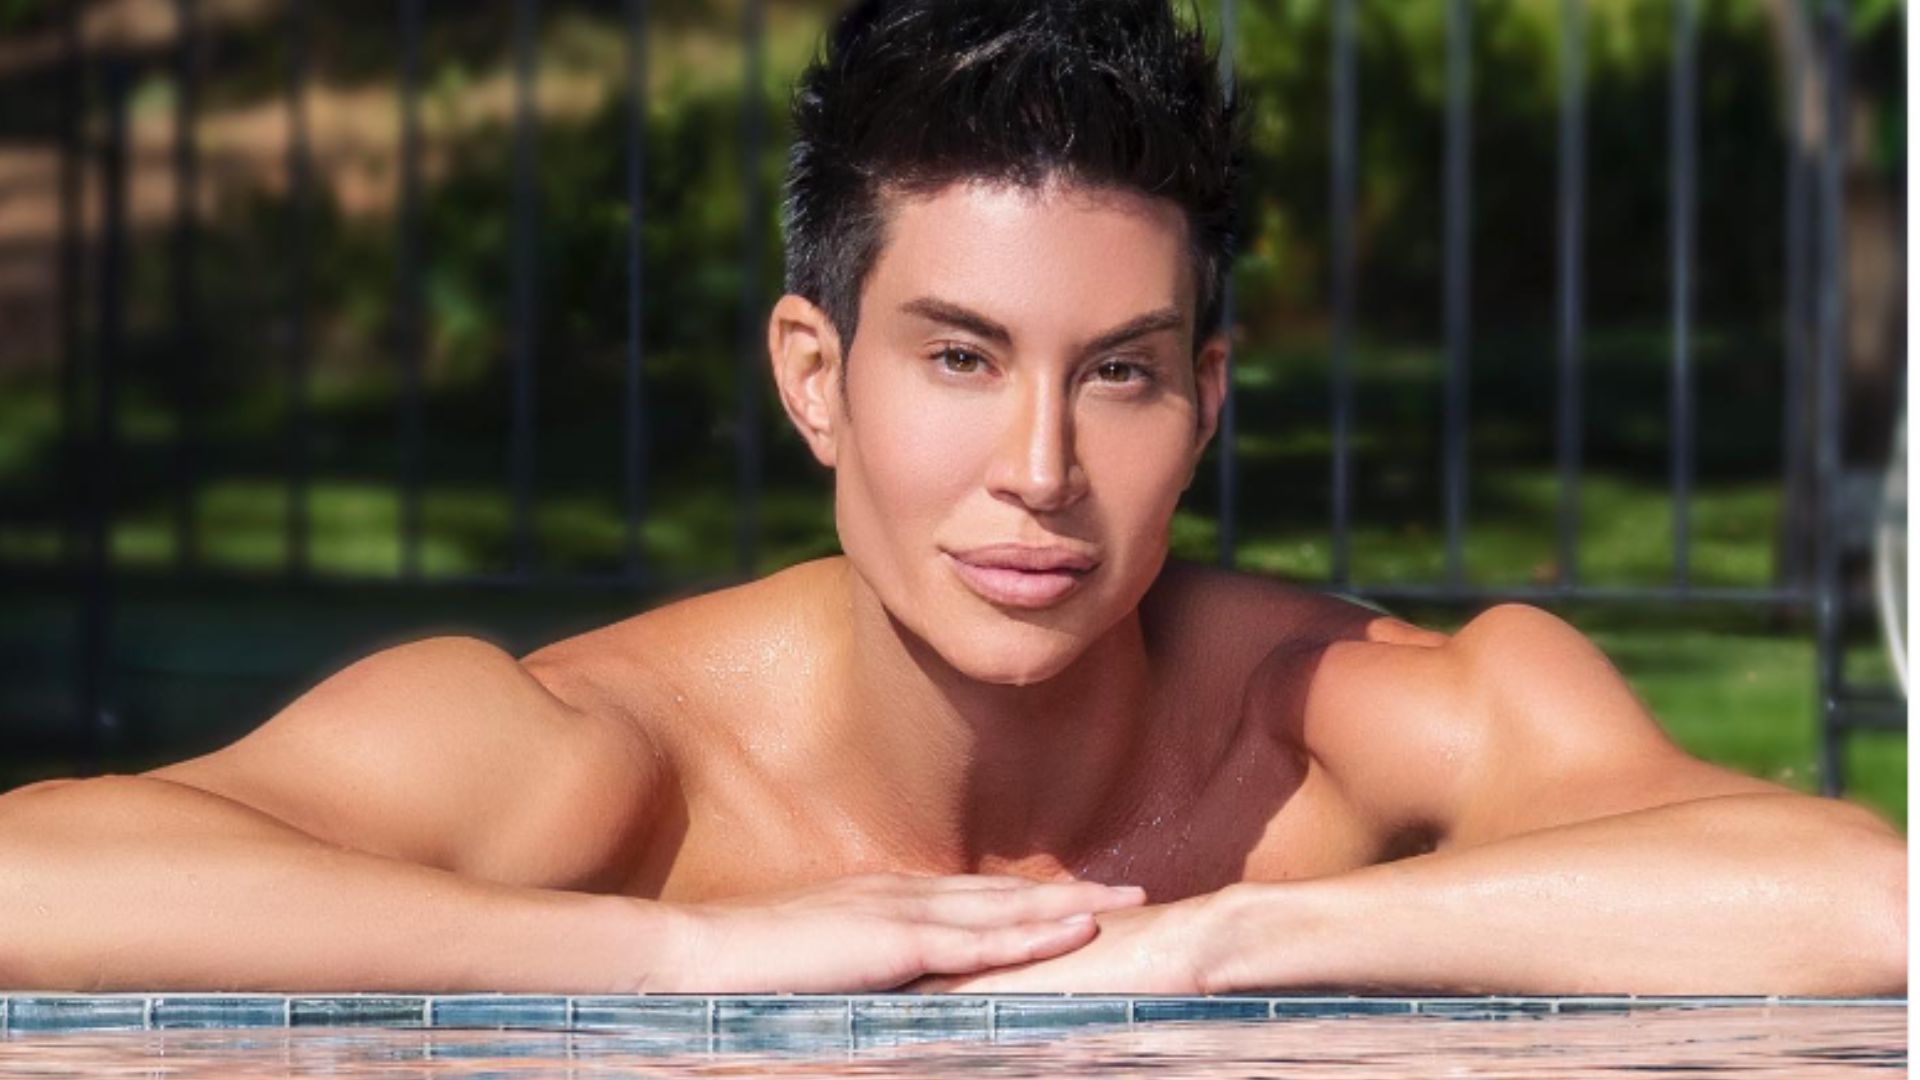 About Justin Jedlica Husband And His Reflection On $1M In Plastic Surgery